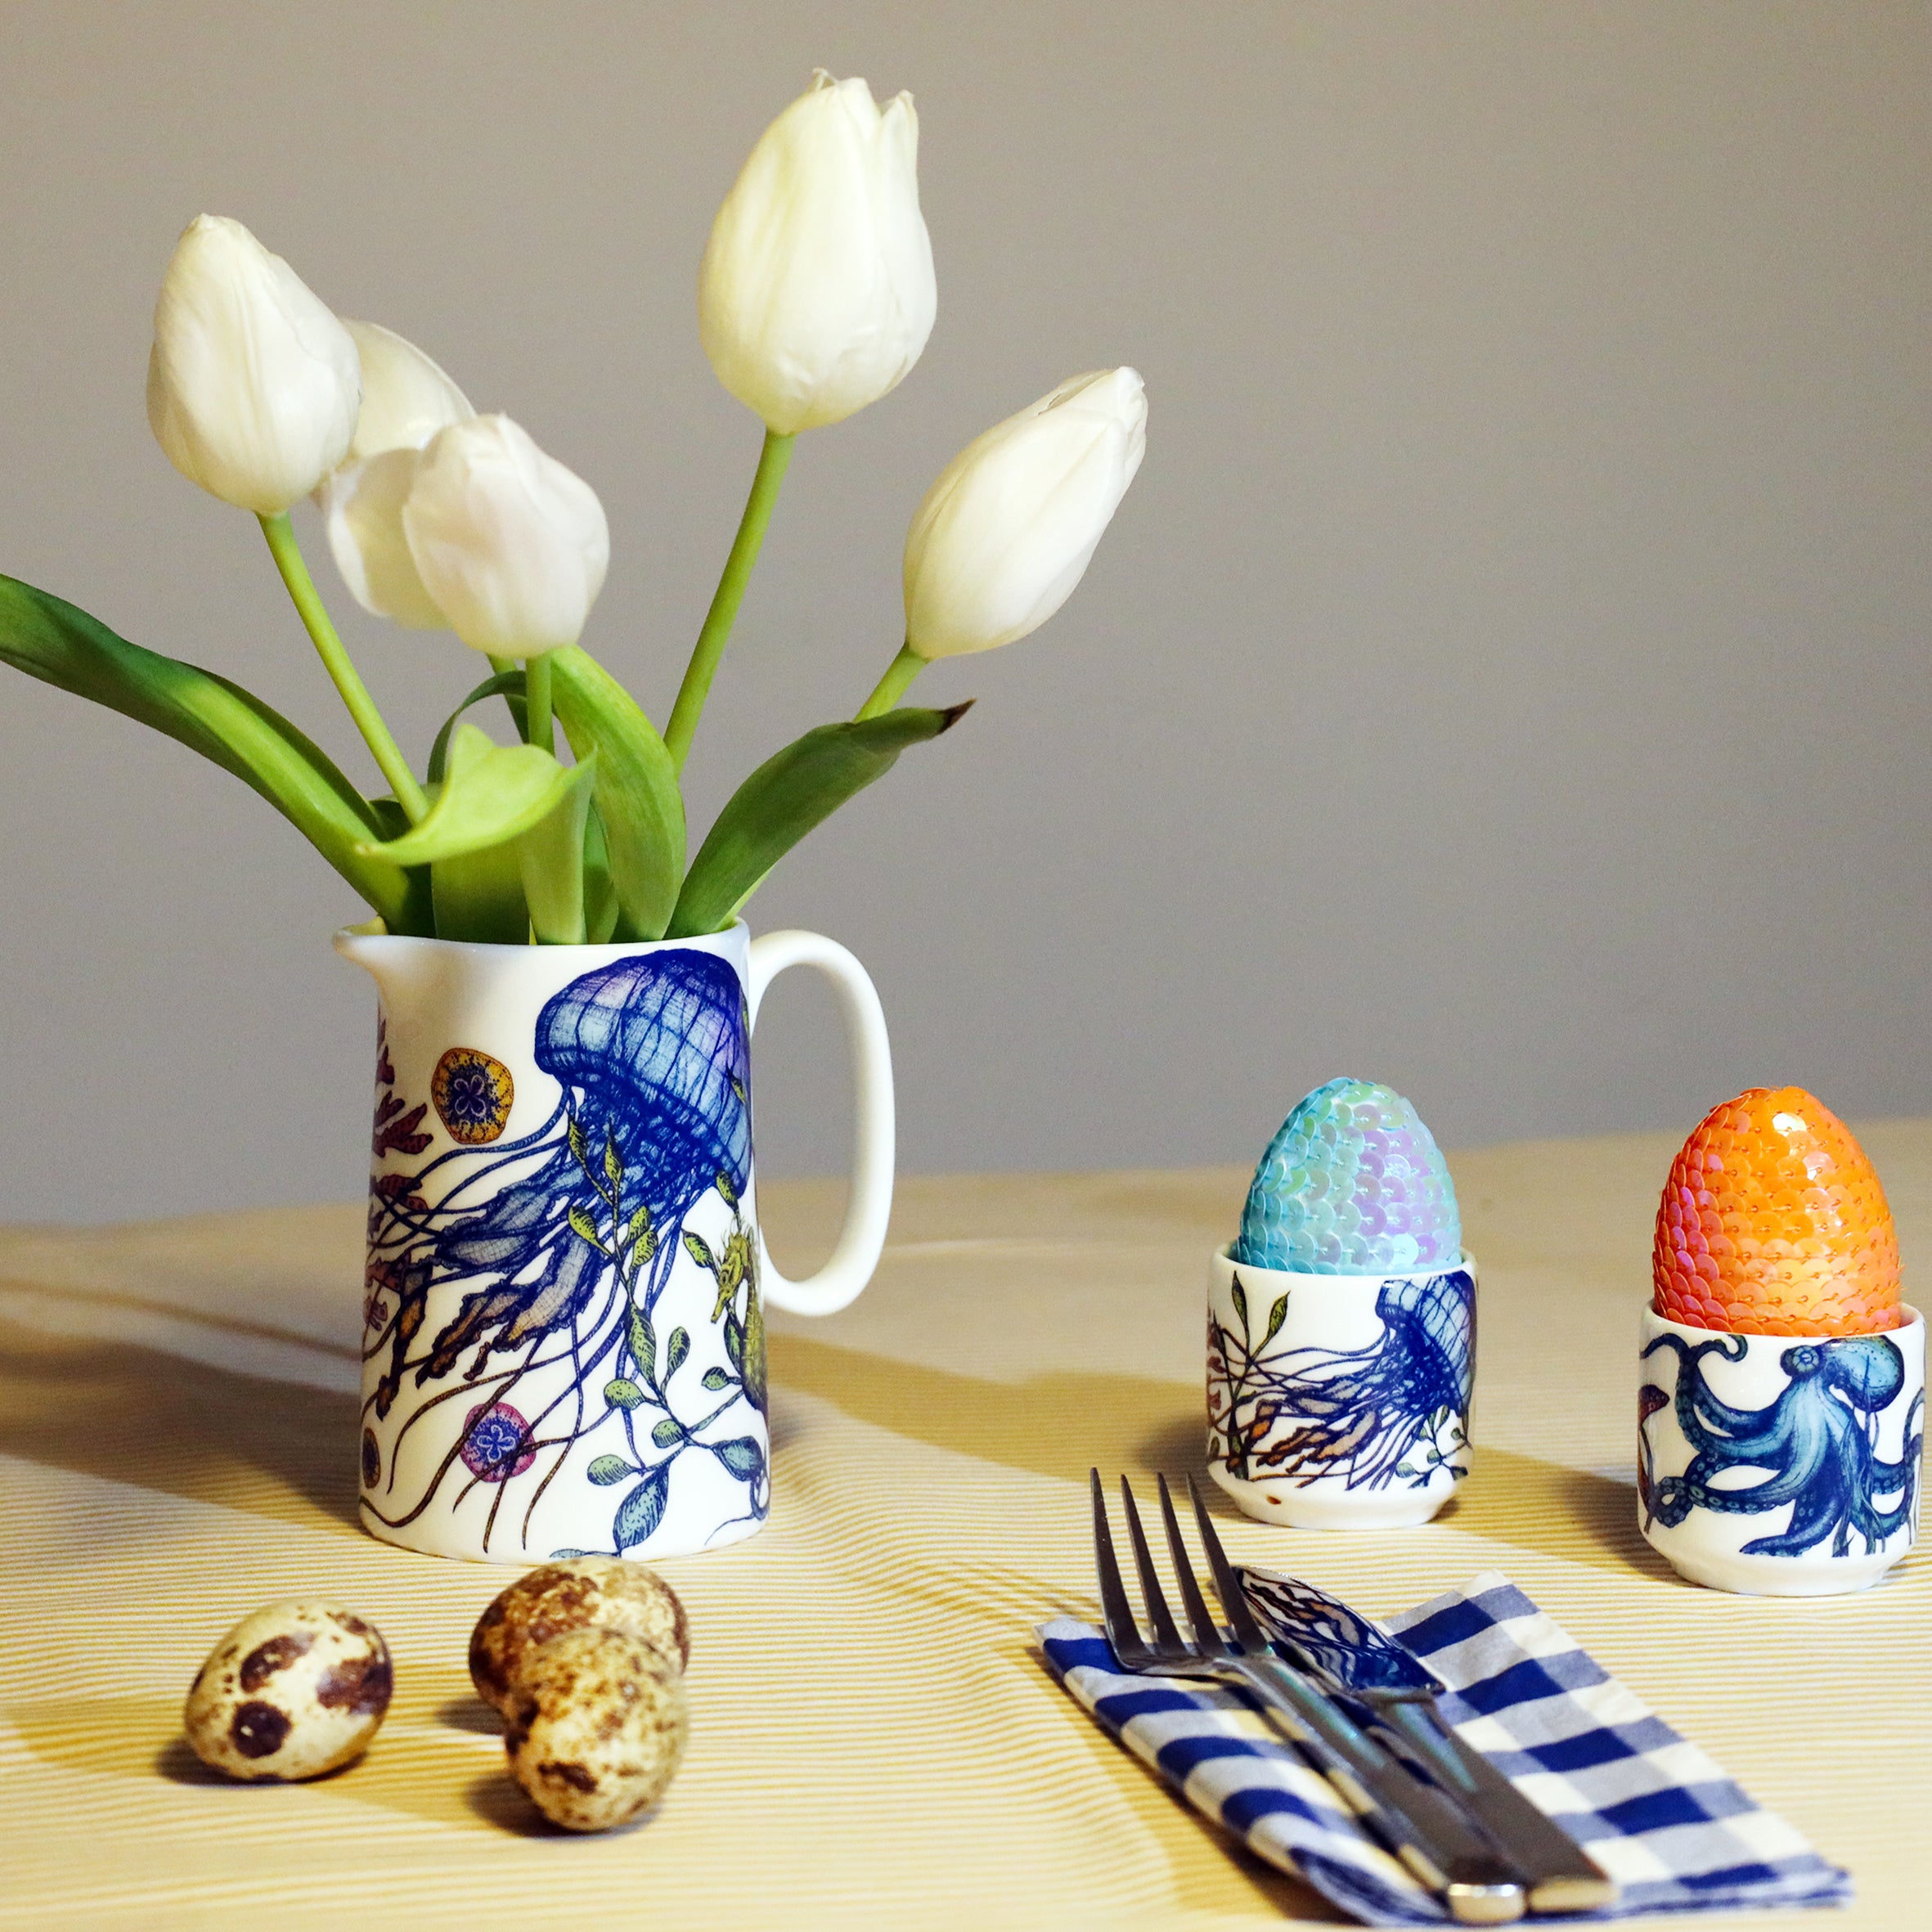 White jug with brightly coloured jellyfish and seaweed design filled with white tulips and sitting on a yellow striped tablecloth. There are 2 egg cups from the same reef range to the sidde with an octopus on one and a jellyfish on the other and they each have a sequined egg in them. There are 3 quails eggs to the front and a folded blue gingham napkin with a knife and fork.